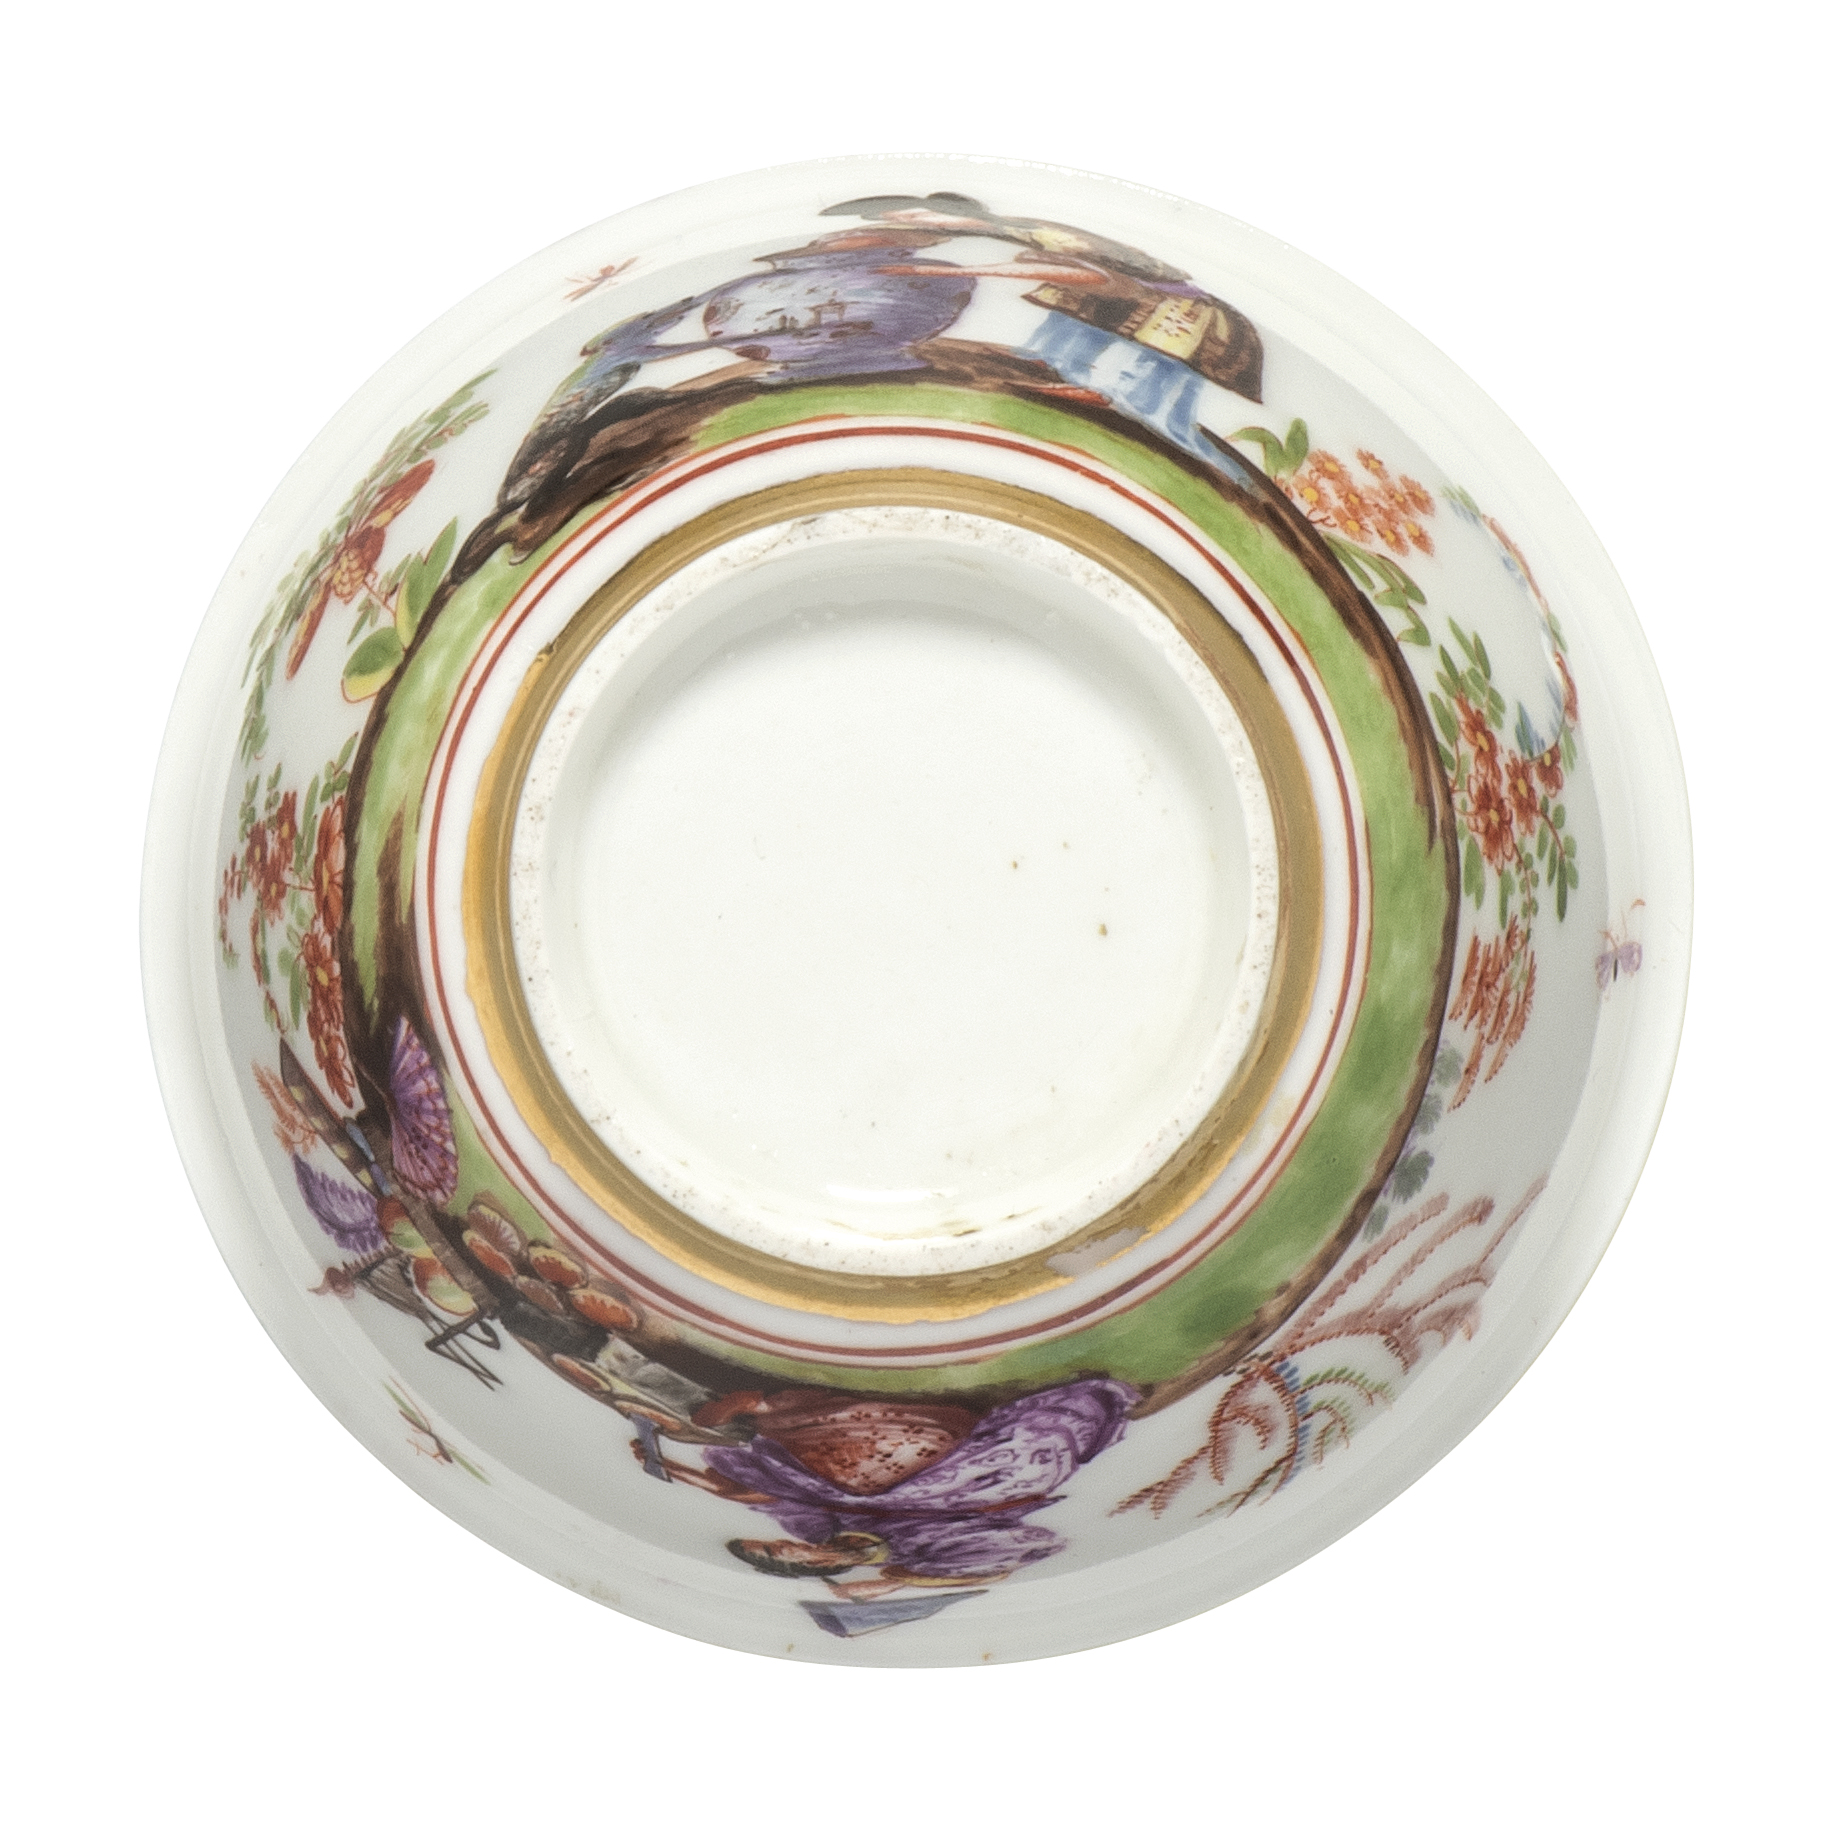 A Meissen porcelain chinoiserie tea bowl and saucer, c.1723-24, painted in the manner of J.G. Hör... - Image 6 of 6